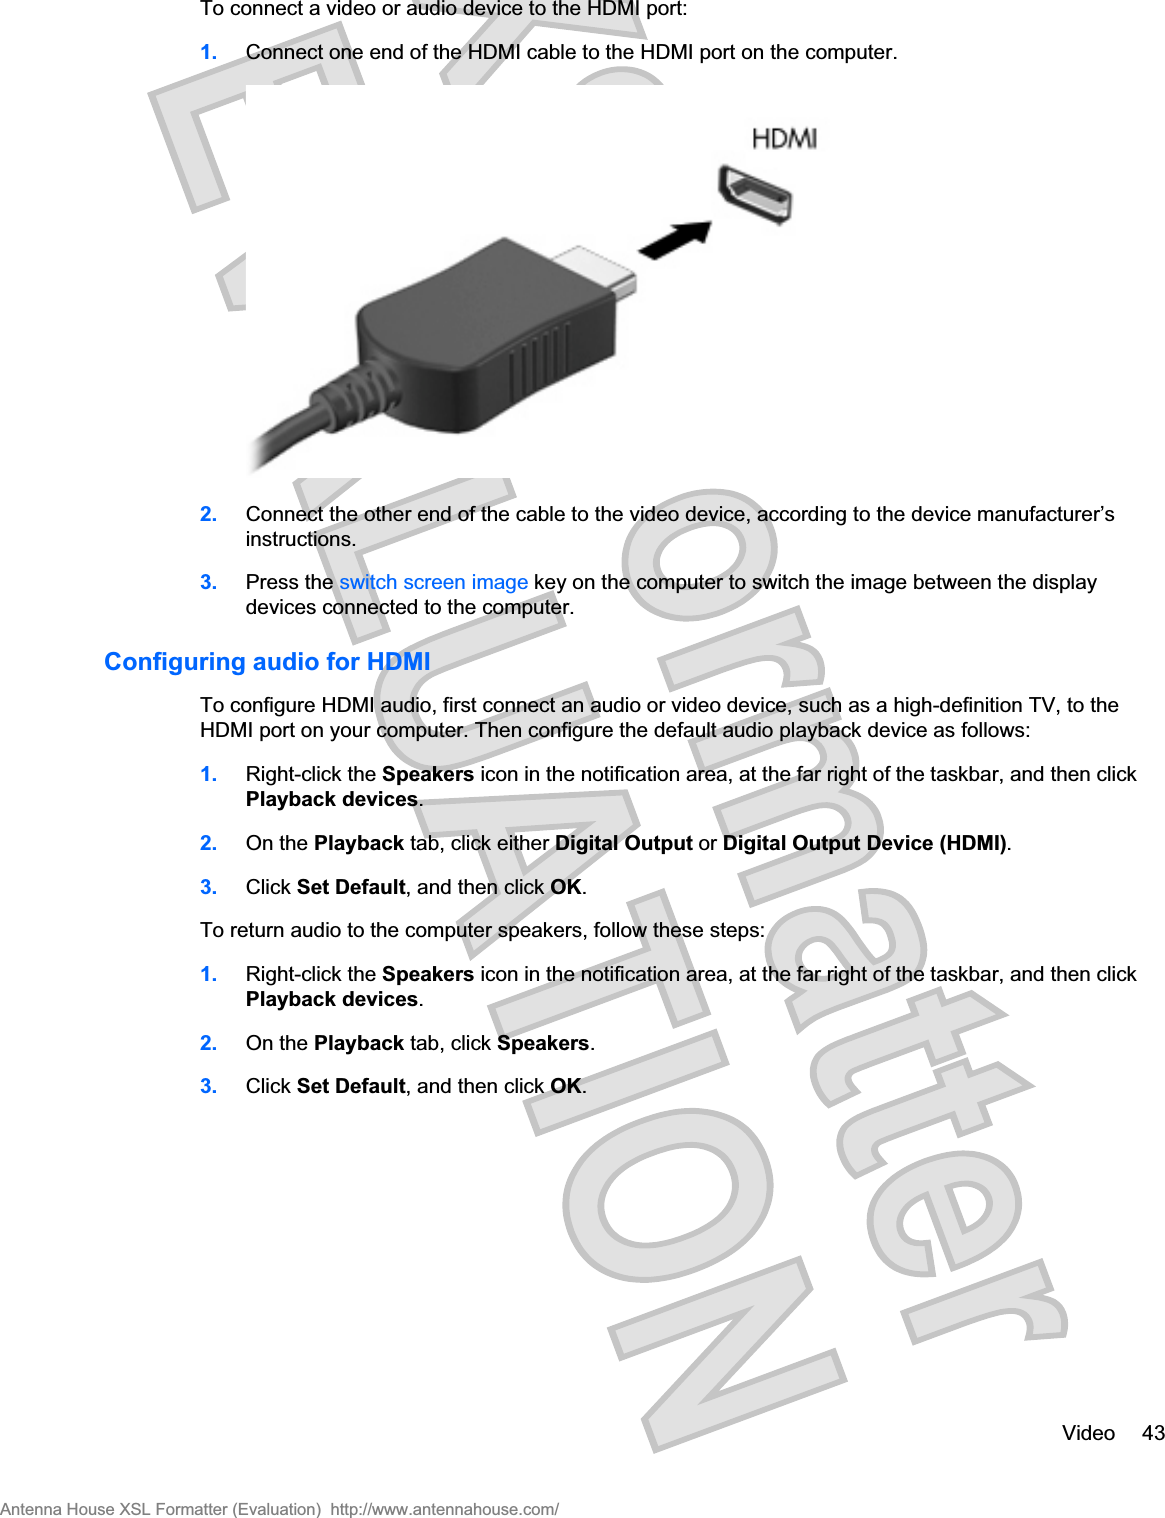 To connect a video or audio device to the HDMI port:1. Connect one end of the HDMI cable to the HDMI port on the computer.2. Connect the other end of the cable to the video device, according to the device manufacturer’sinstructions.3. Press the switch screen image key on the computer to switch the image between the displaydevices connected to the computer.Configuring audio for HDMITo configure HDMI audio, first connect an audio or video device, such as a high-definition TV, to theHDMI port on your computer. Then configure the default audio playback device as follows:1. Right-click the Speakers icon in the notification area, at the far right of the taskbar, and then clickPlayback devices.2. On the Playback tab, click either Digital Output or Digital Output Device (HDMI).3. Click Set Default, and then click OK.To return audio to the computer speakers, follow these steps:1. Right-click the Speakers icon in the notification area, at the far right of the taskbar, and then clickPlayback devices.2. On the Playback tab, click Speakers.3. Click Set Default, and then click OK.Video 43Antenna House XSL Formatter (Evaluation)  http://www.antennahouse.com/